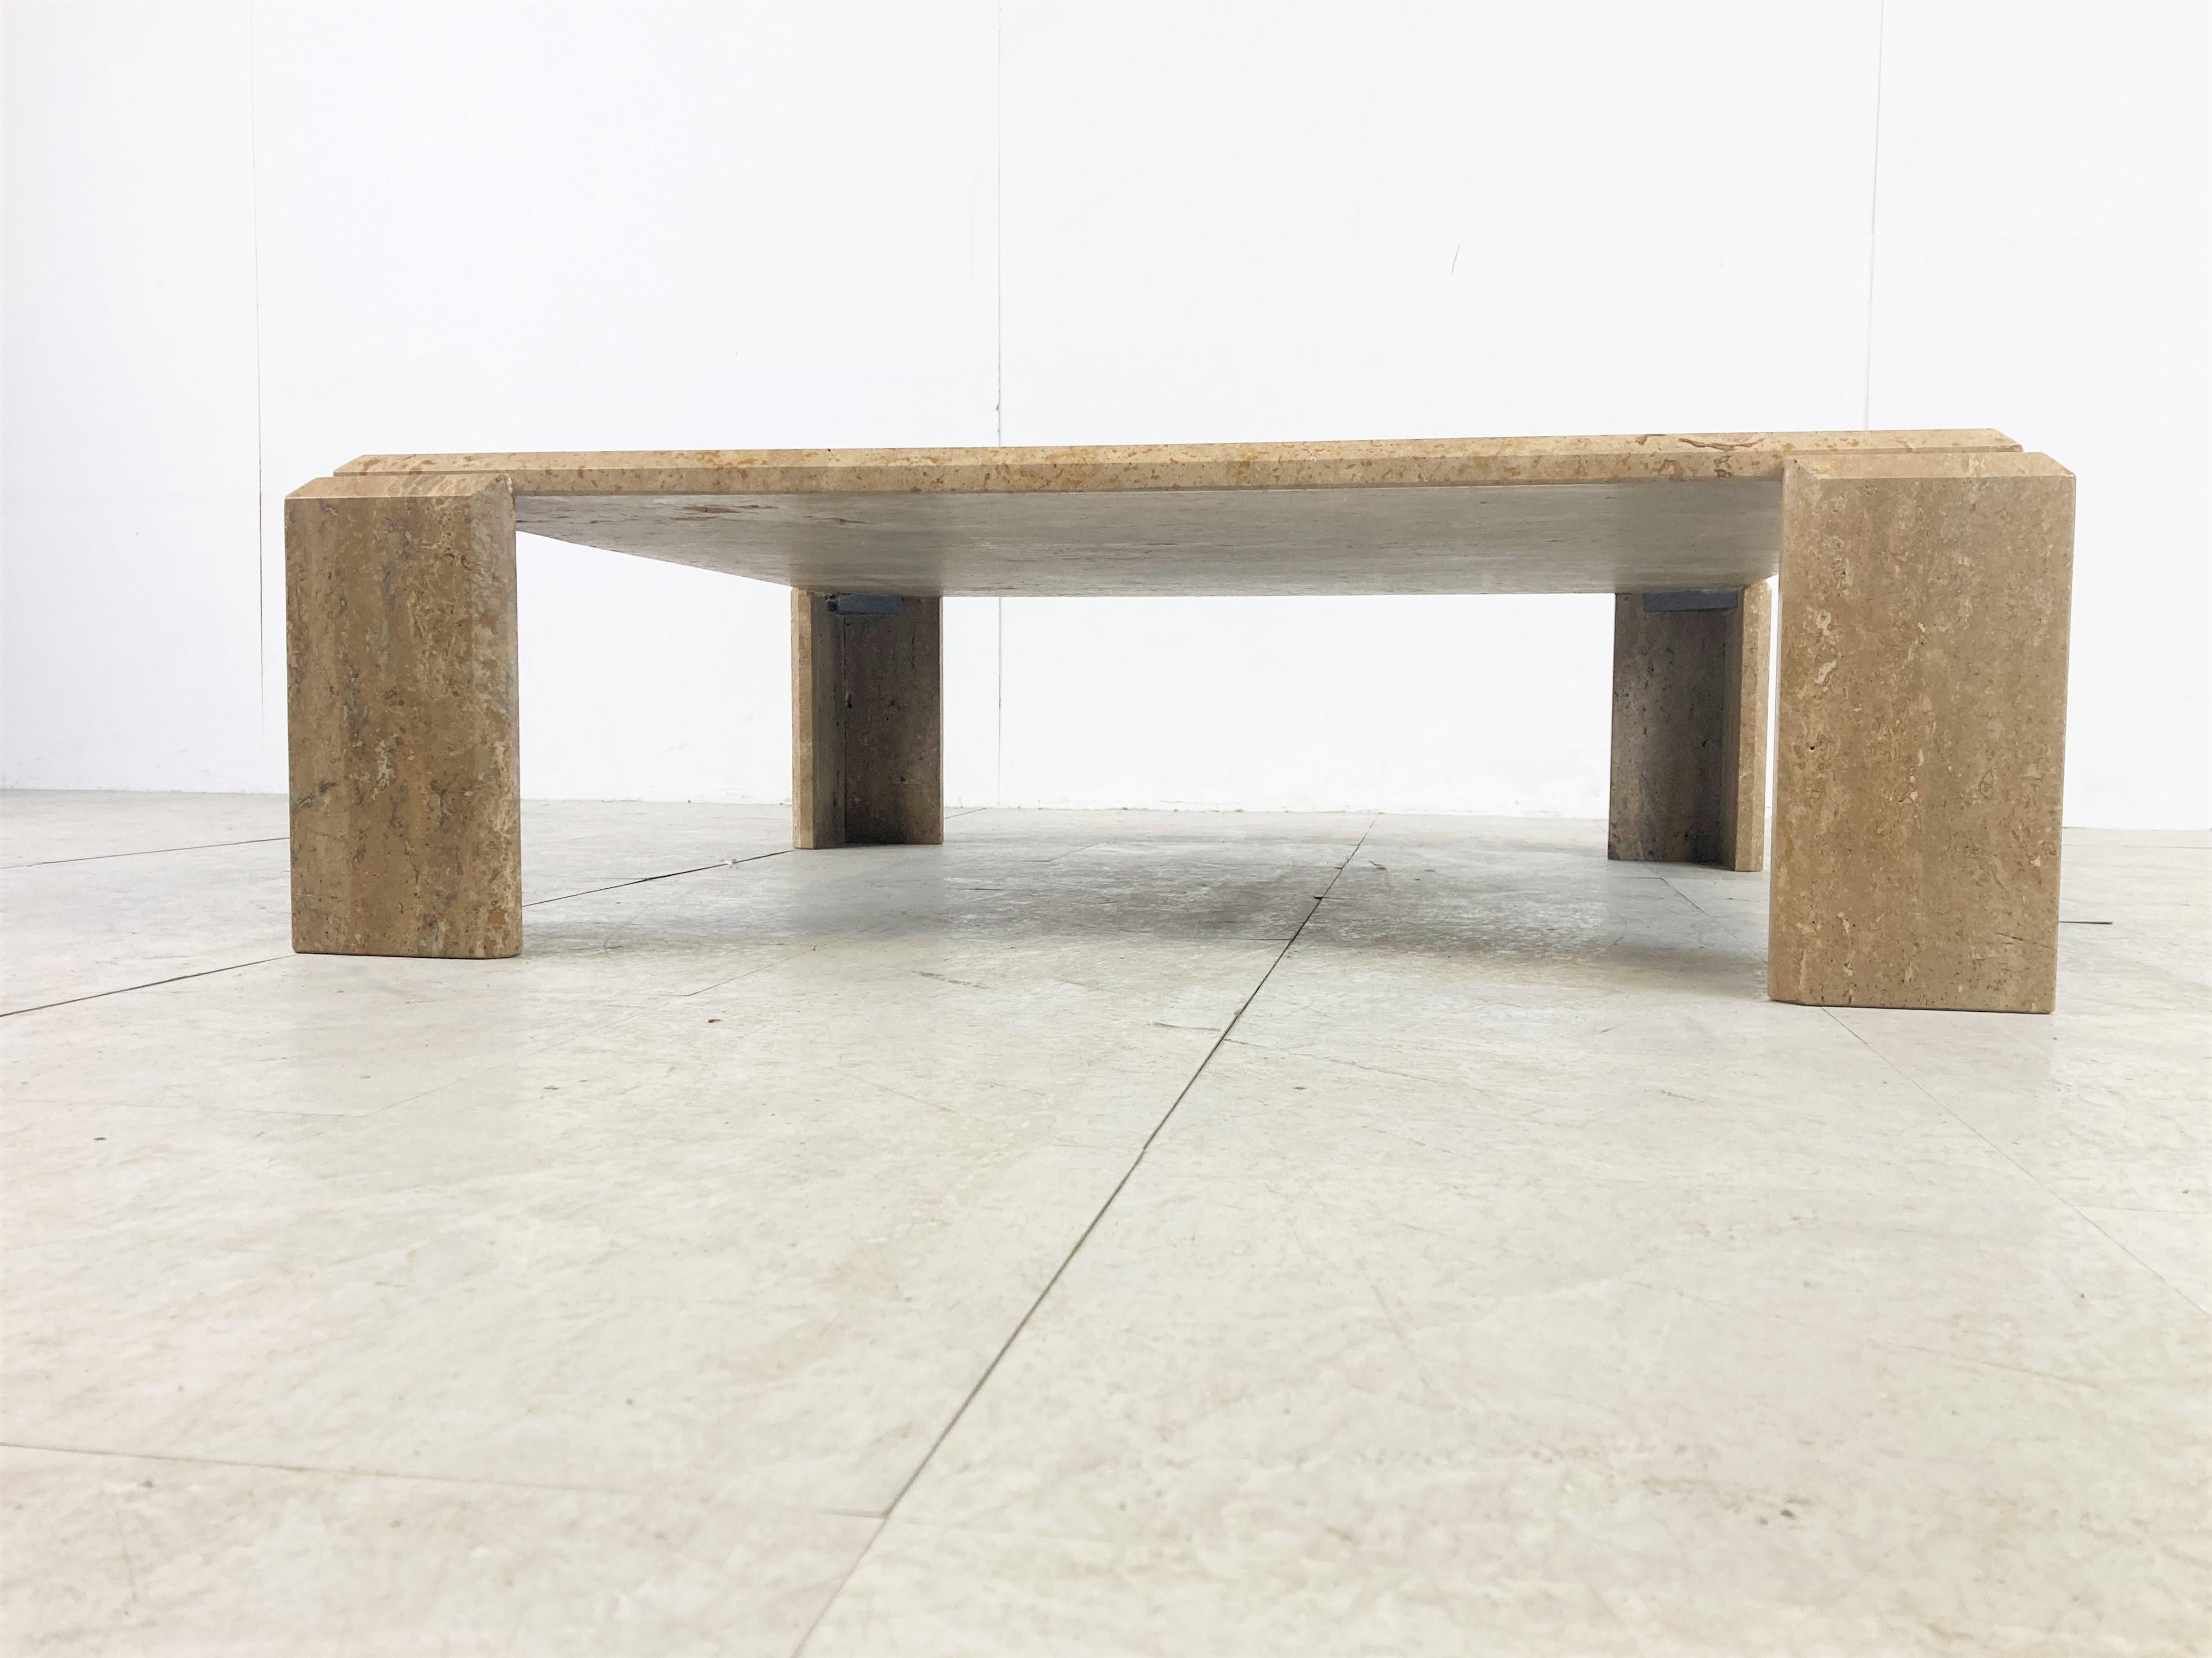 Vintage square travertine coffee table with four fixed legs.

Beautiful natural travertine stone with a beveled edge.

Good condition

1970s - Italy

Measures: Height: 32cm/12.59